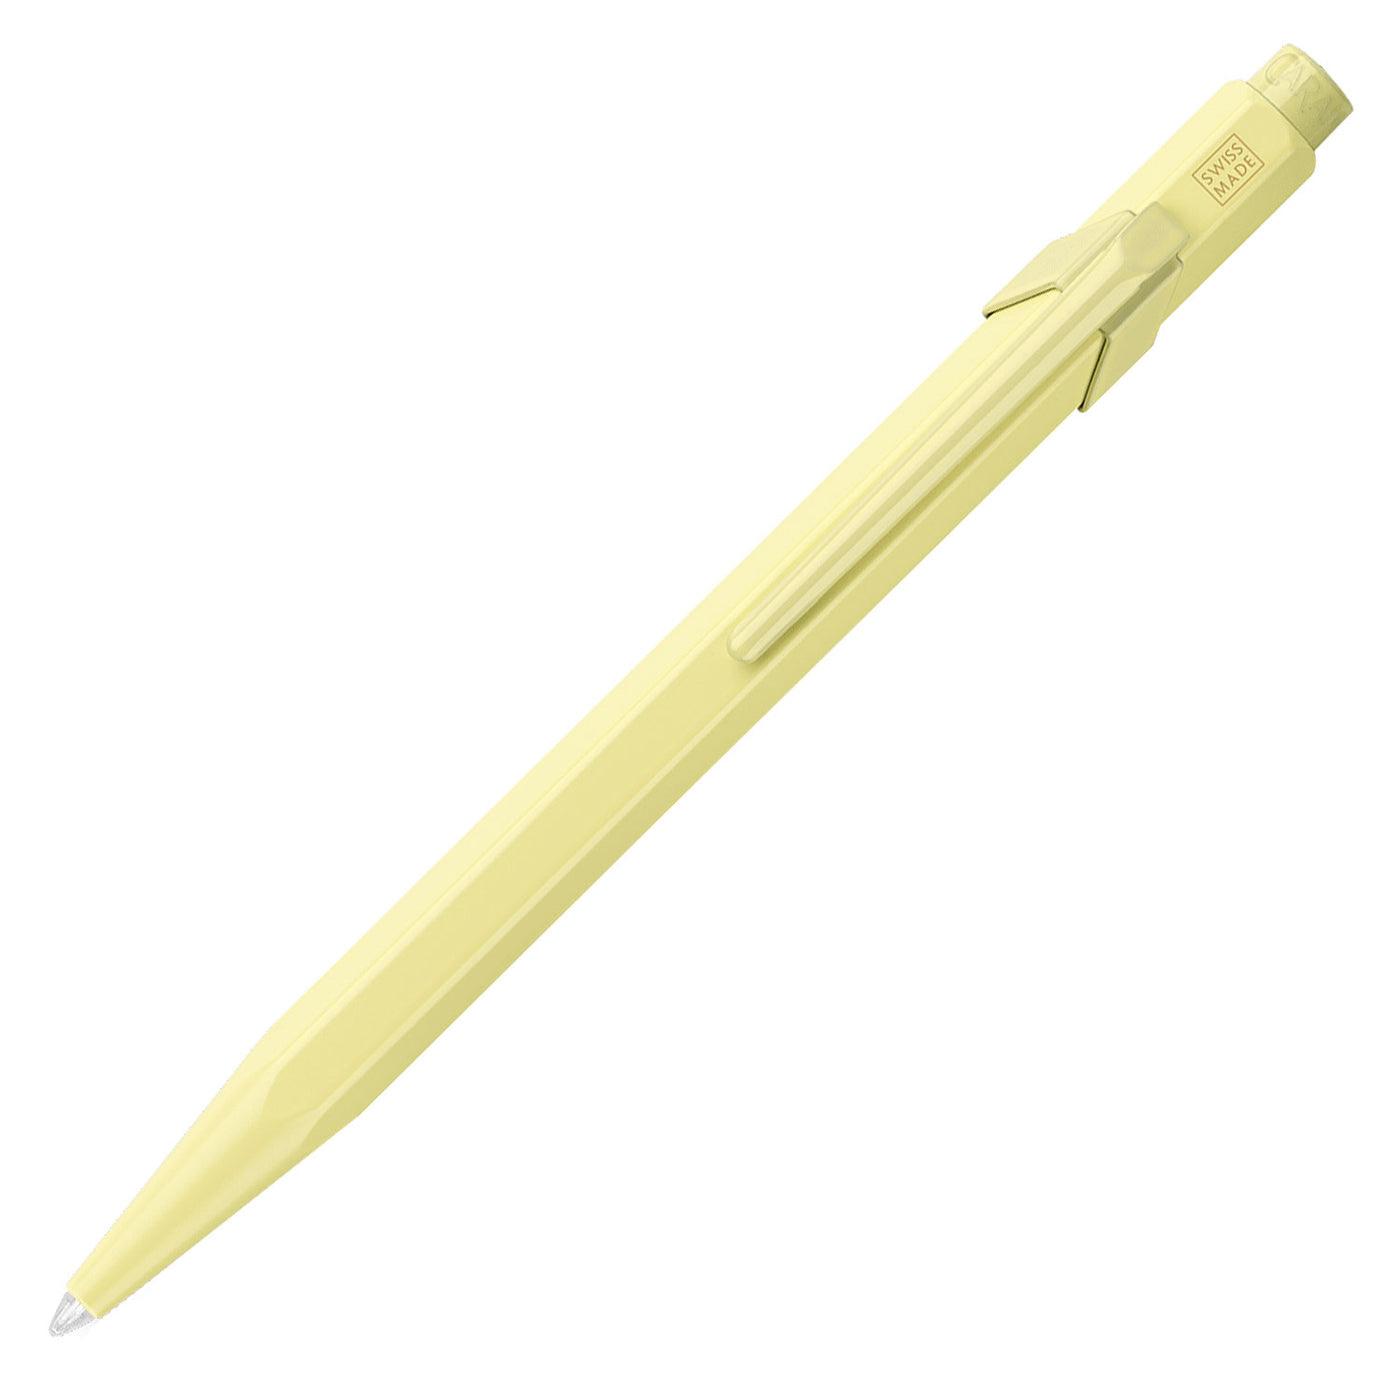 Caran d'Ache 849 Claim Your Style Ball Pen - Icy Lemon (Limited Edition) 1